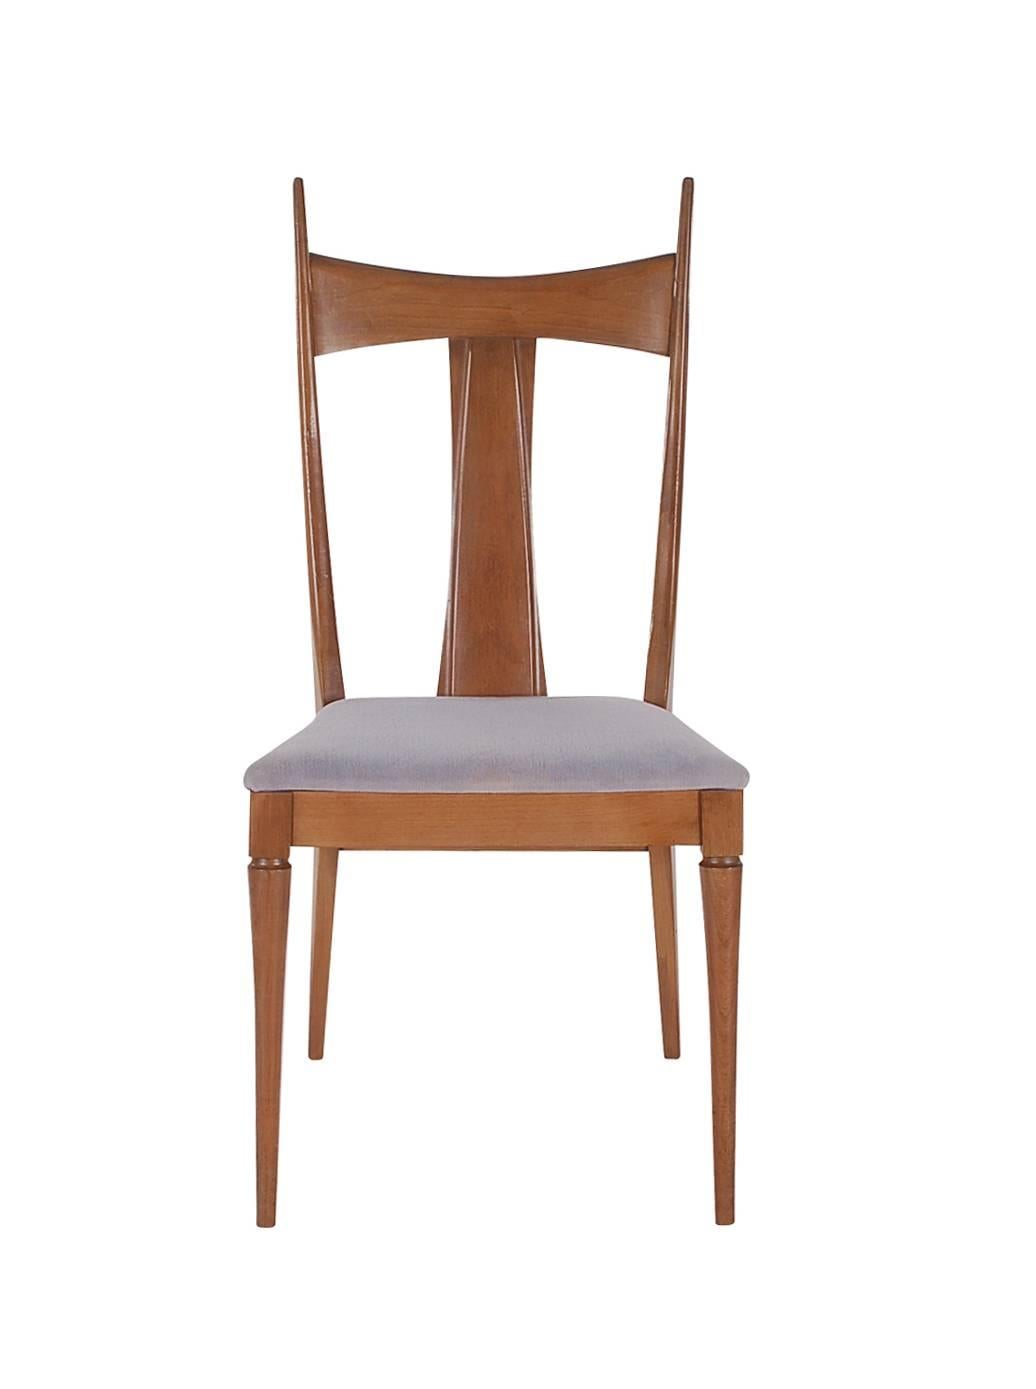 Mid-20th Century Mid-Century Modern Walnut Dining Chairs after Paul McCobb or Gio Ponti For Sale